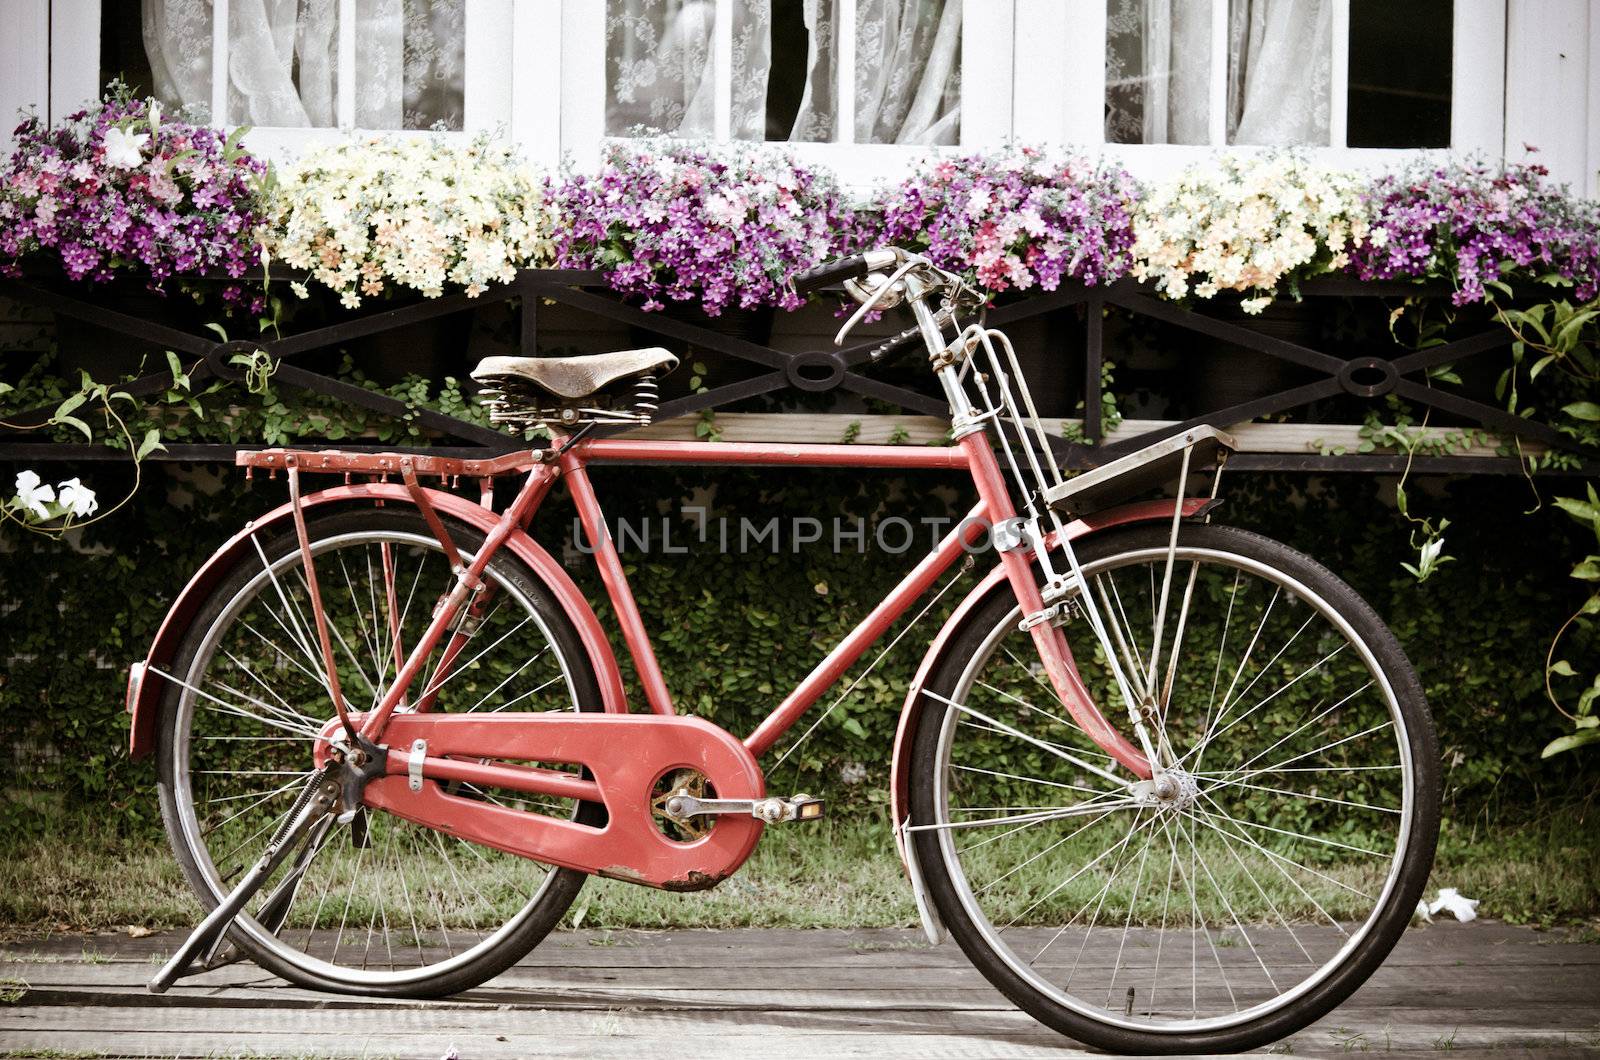 Bicycle and flowers. by aoo3771